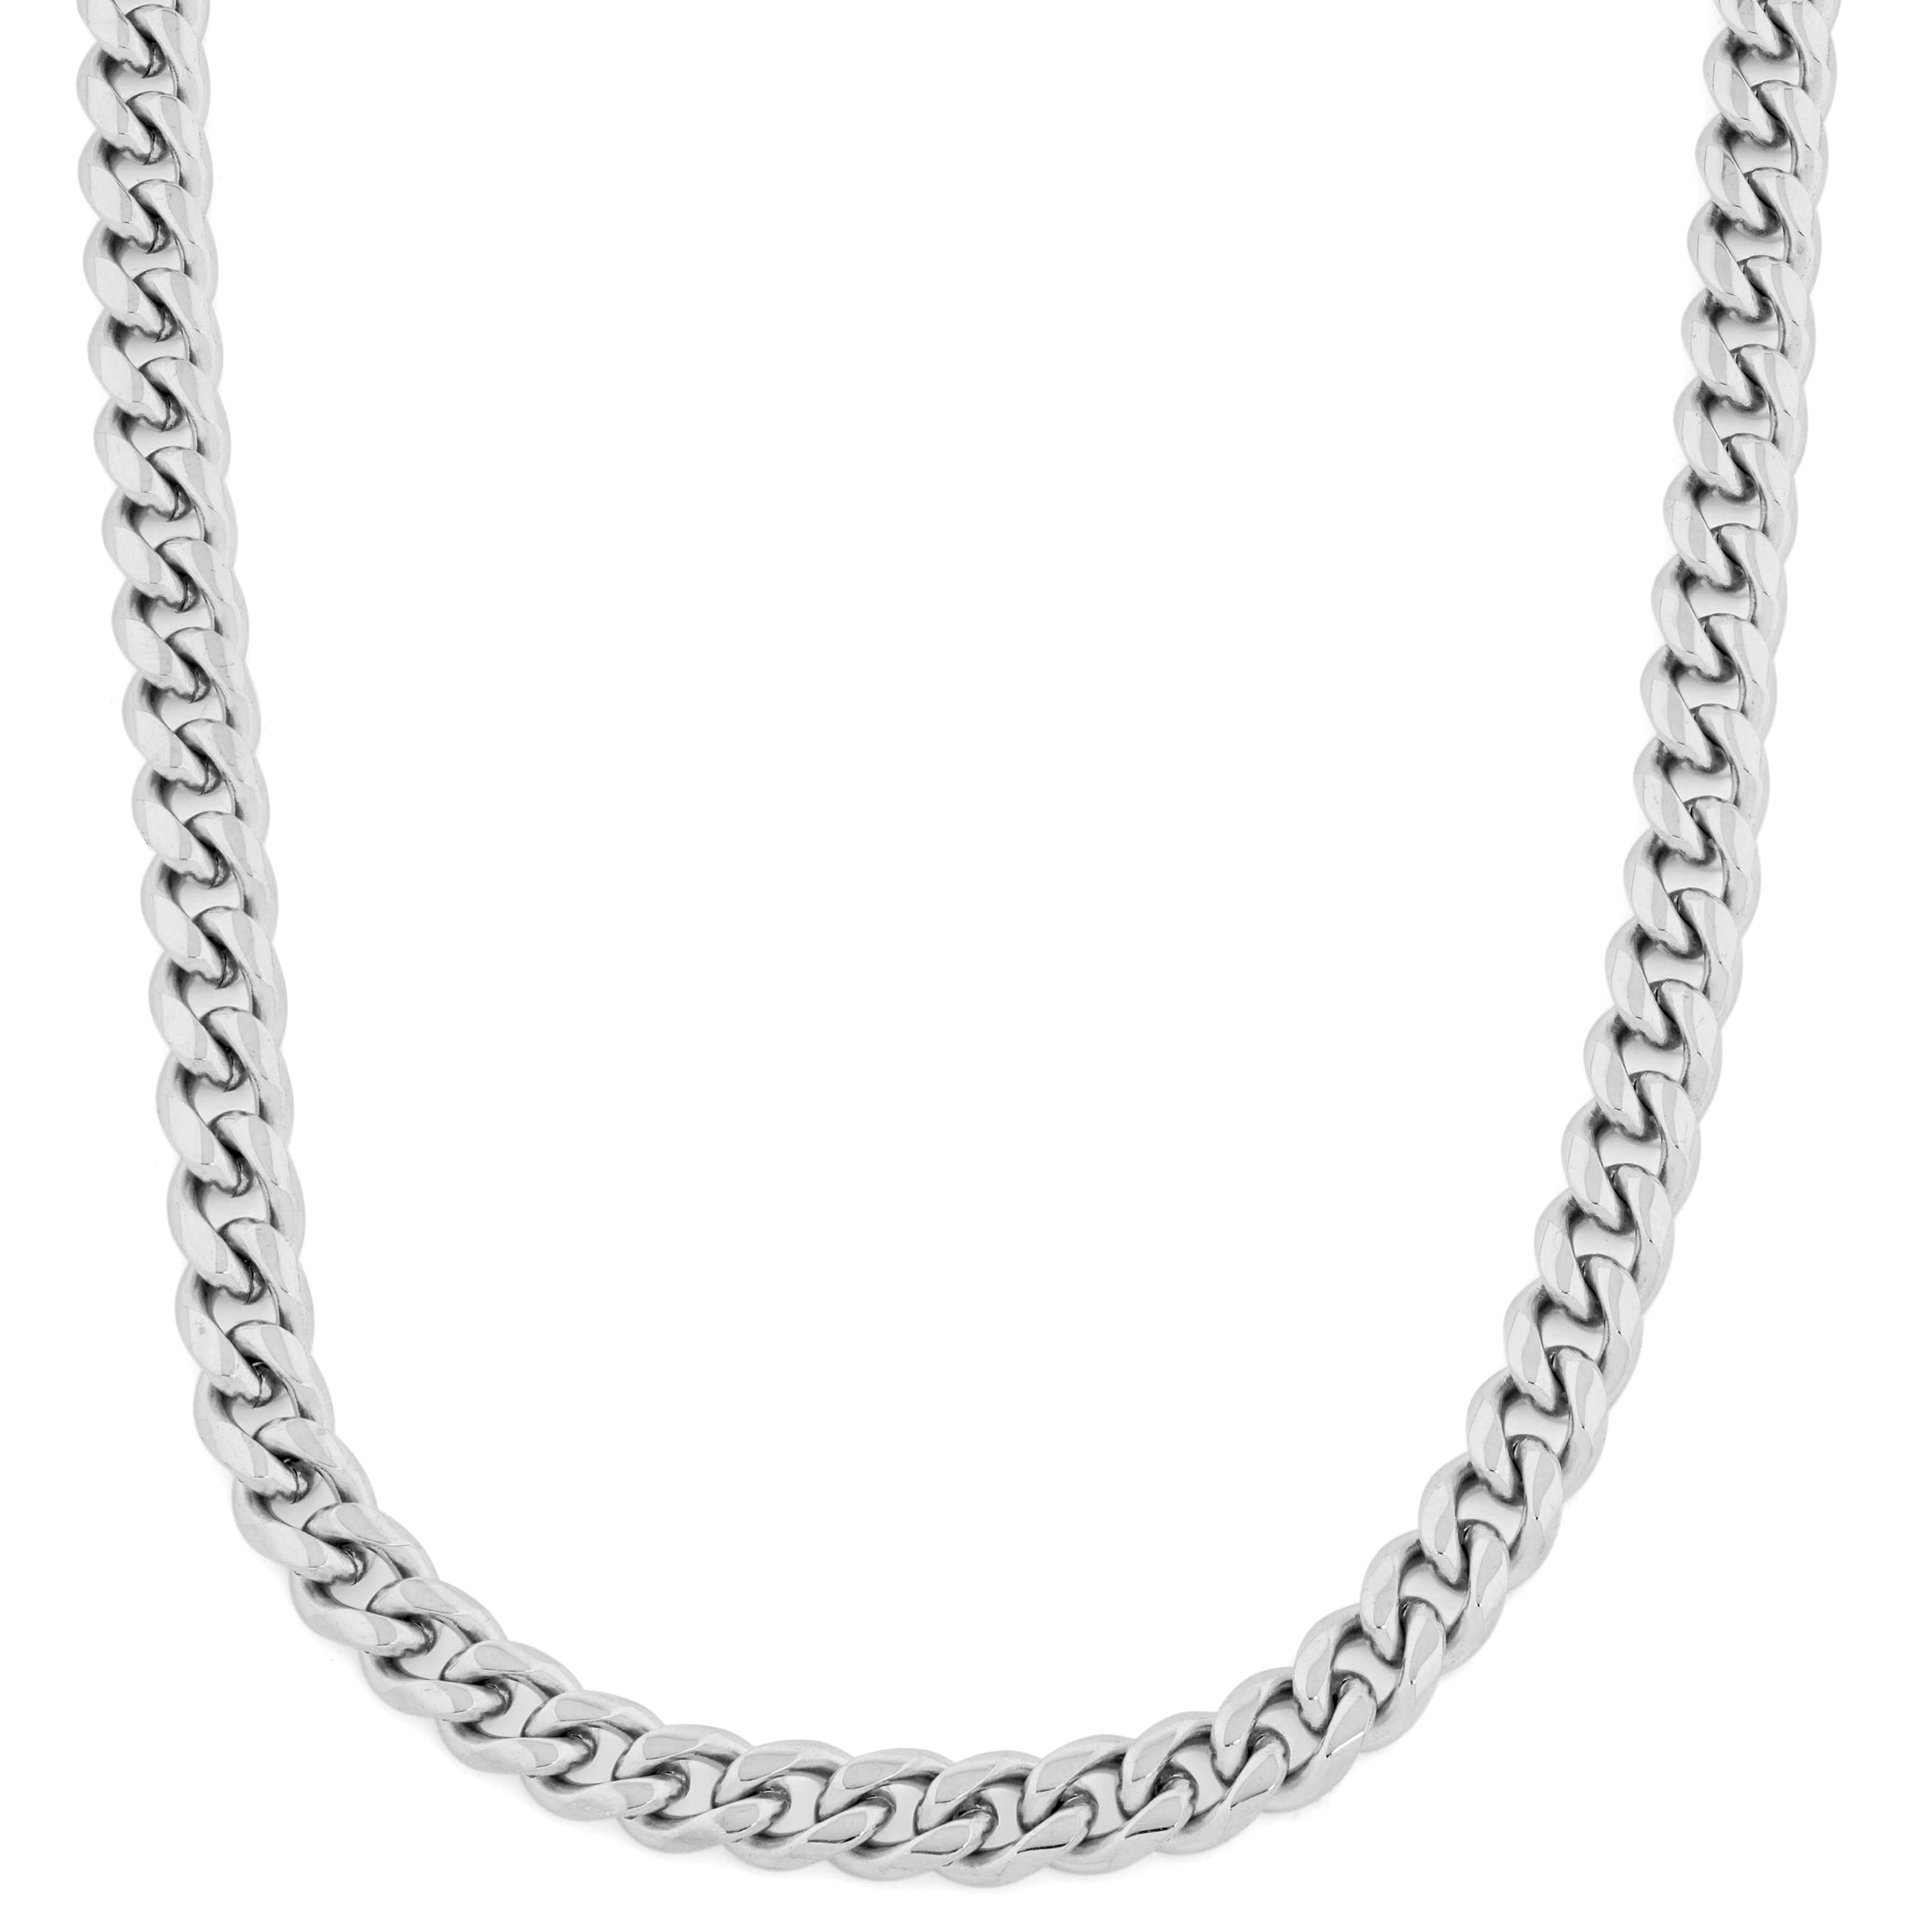 10 mm Silver-Tone Stainless Steel Cuban Chain Necklace